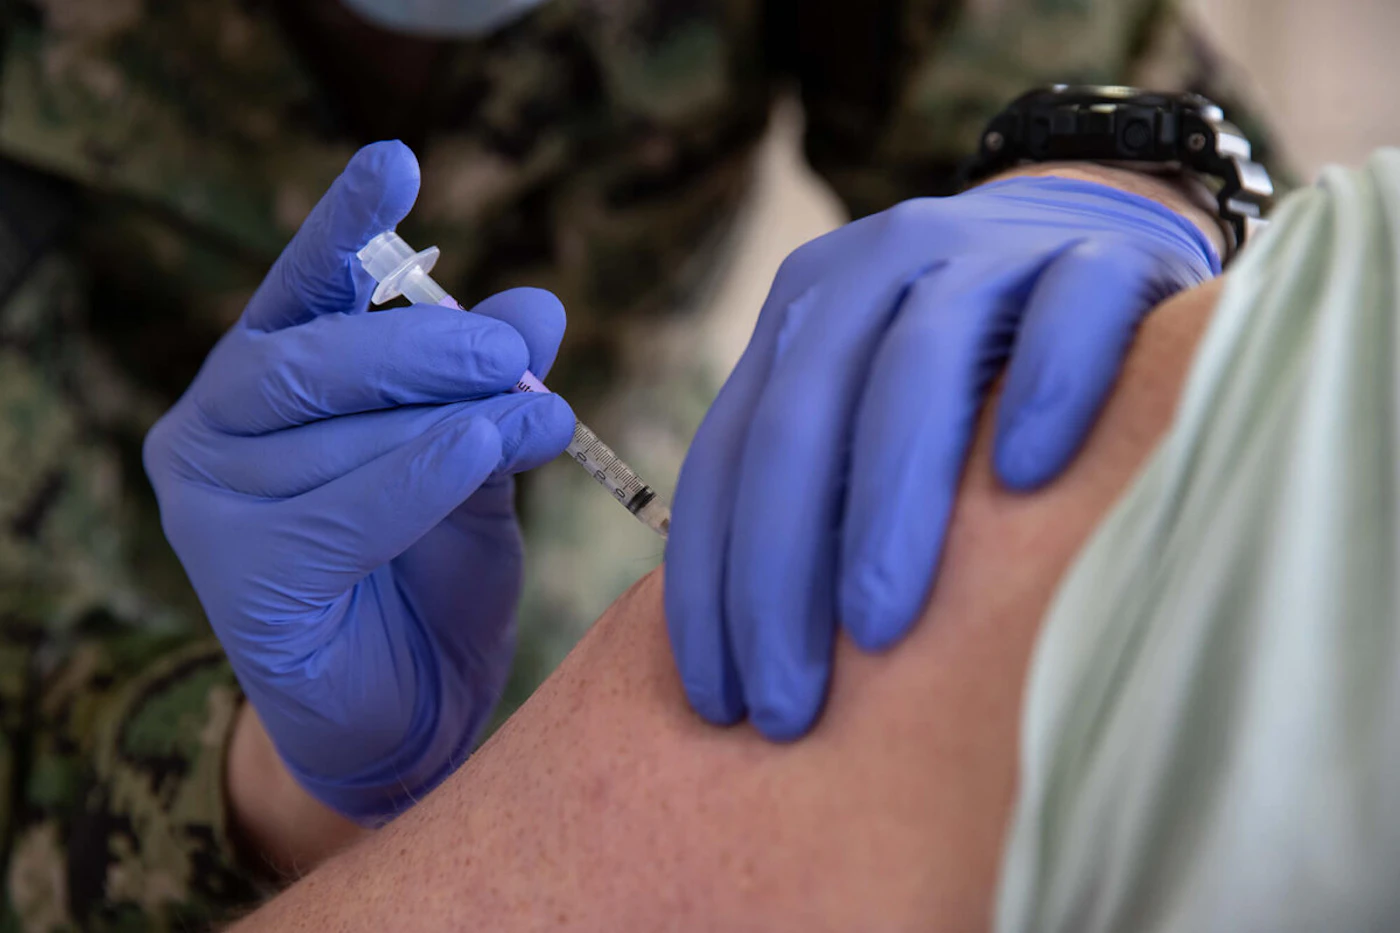 A corpsman with the USS Gerald R. Ford gives a COVID-19 vaccination at Naval Station Norfolk on April 8, 2021. (Photo by Seaman Jackson Adkins/U.S. Navy)